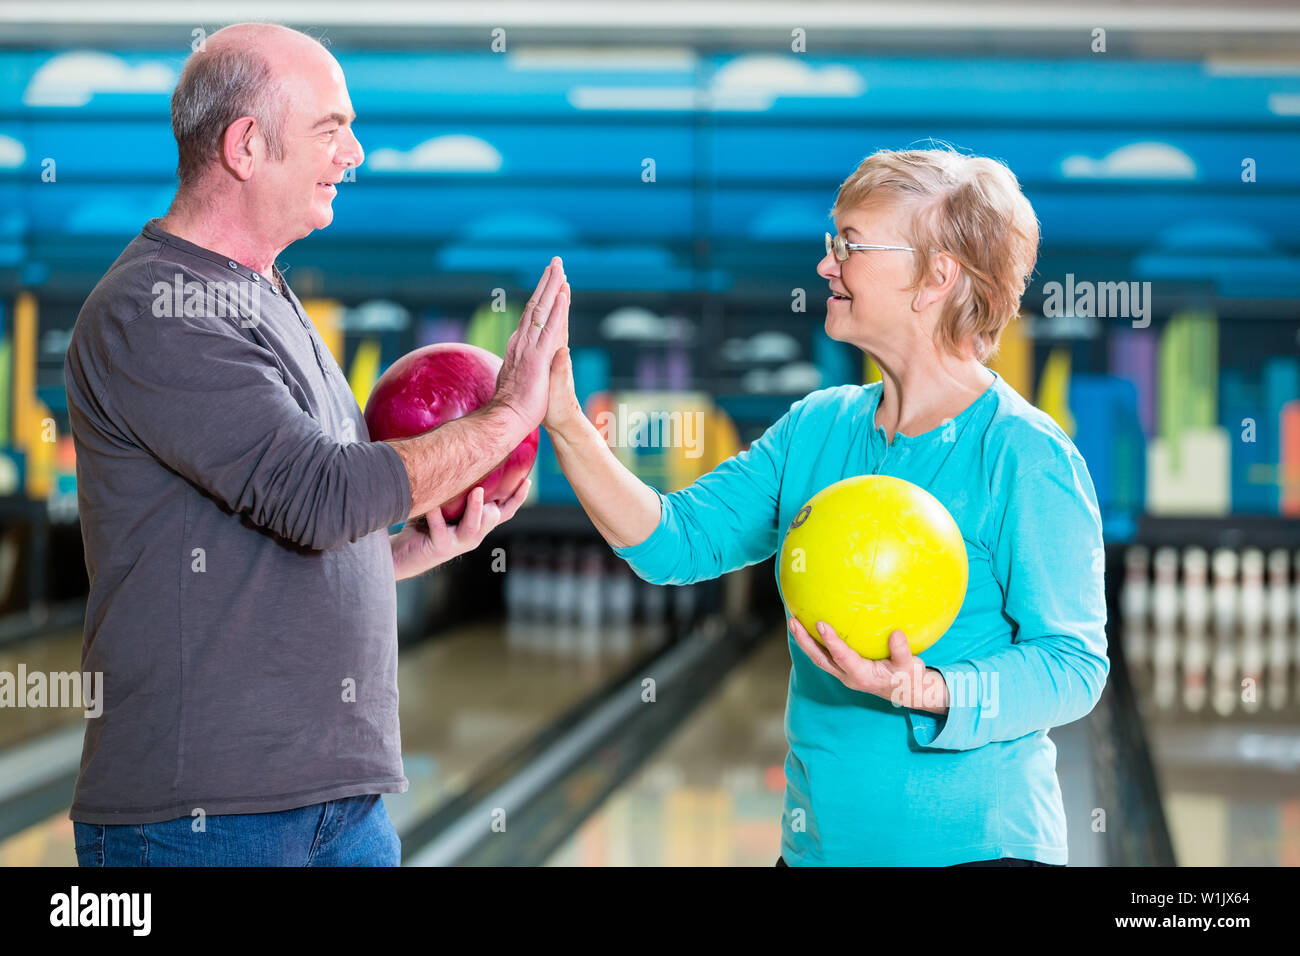 Smiling mature couple giving high-five Stock Photo